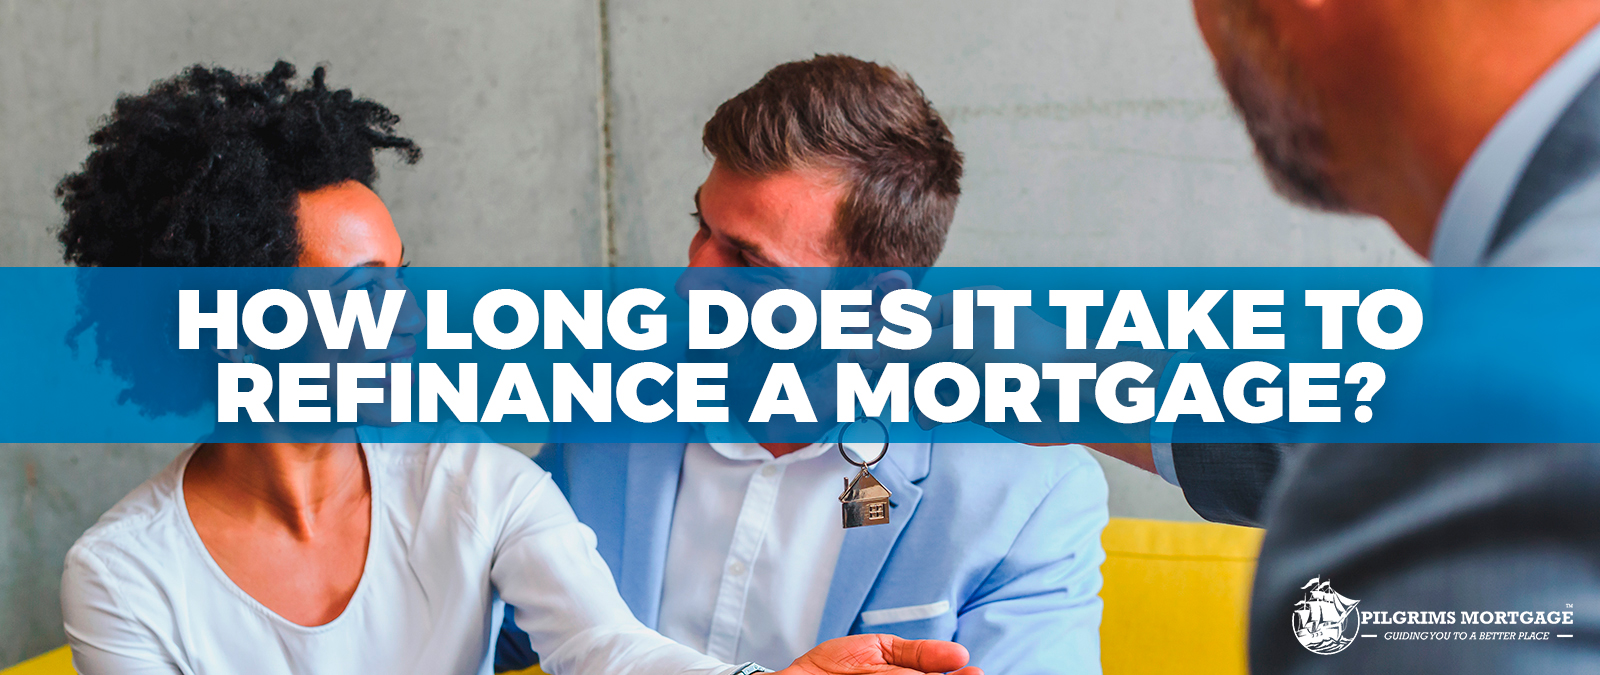 How long does it take to refinance